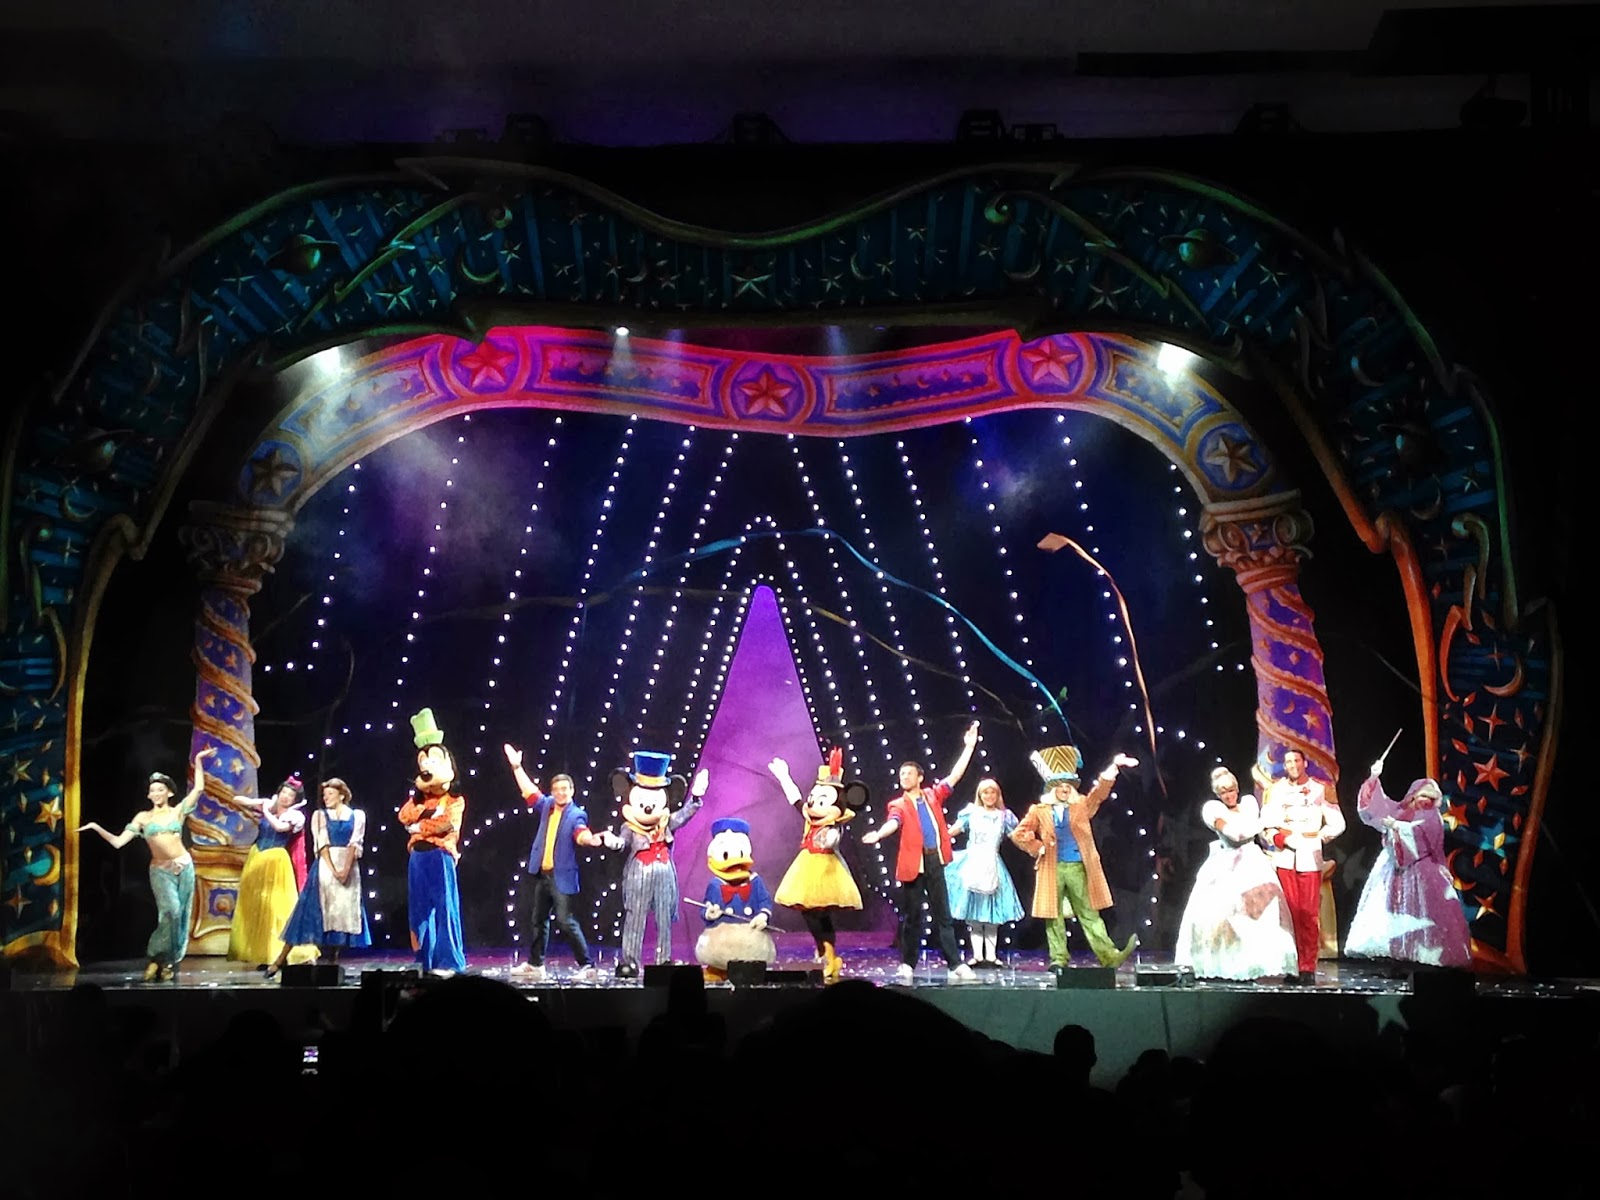 Mickey's Magic Show - presented by Disney Live!, international tour